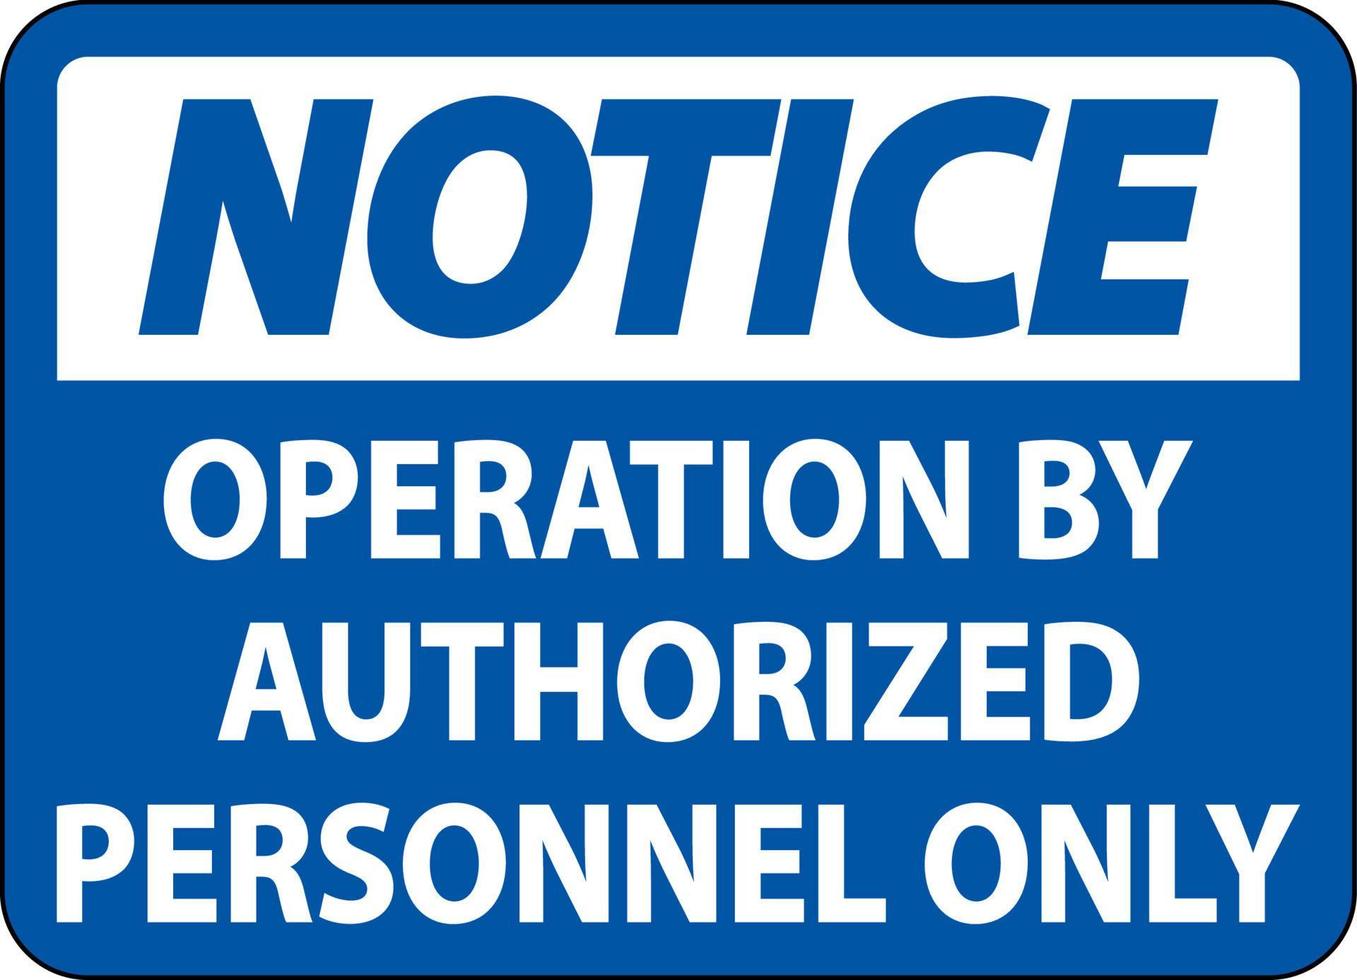 Notice Operation By Authorized Only Sign On White Background vector